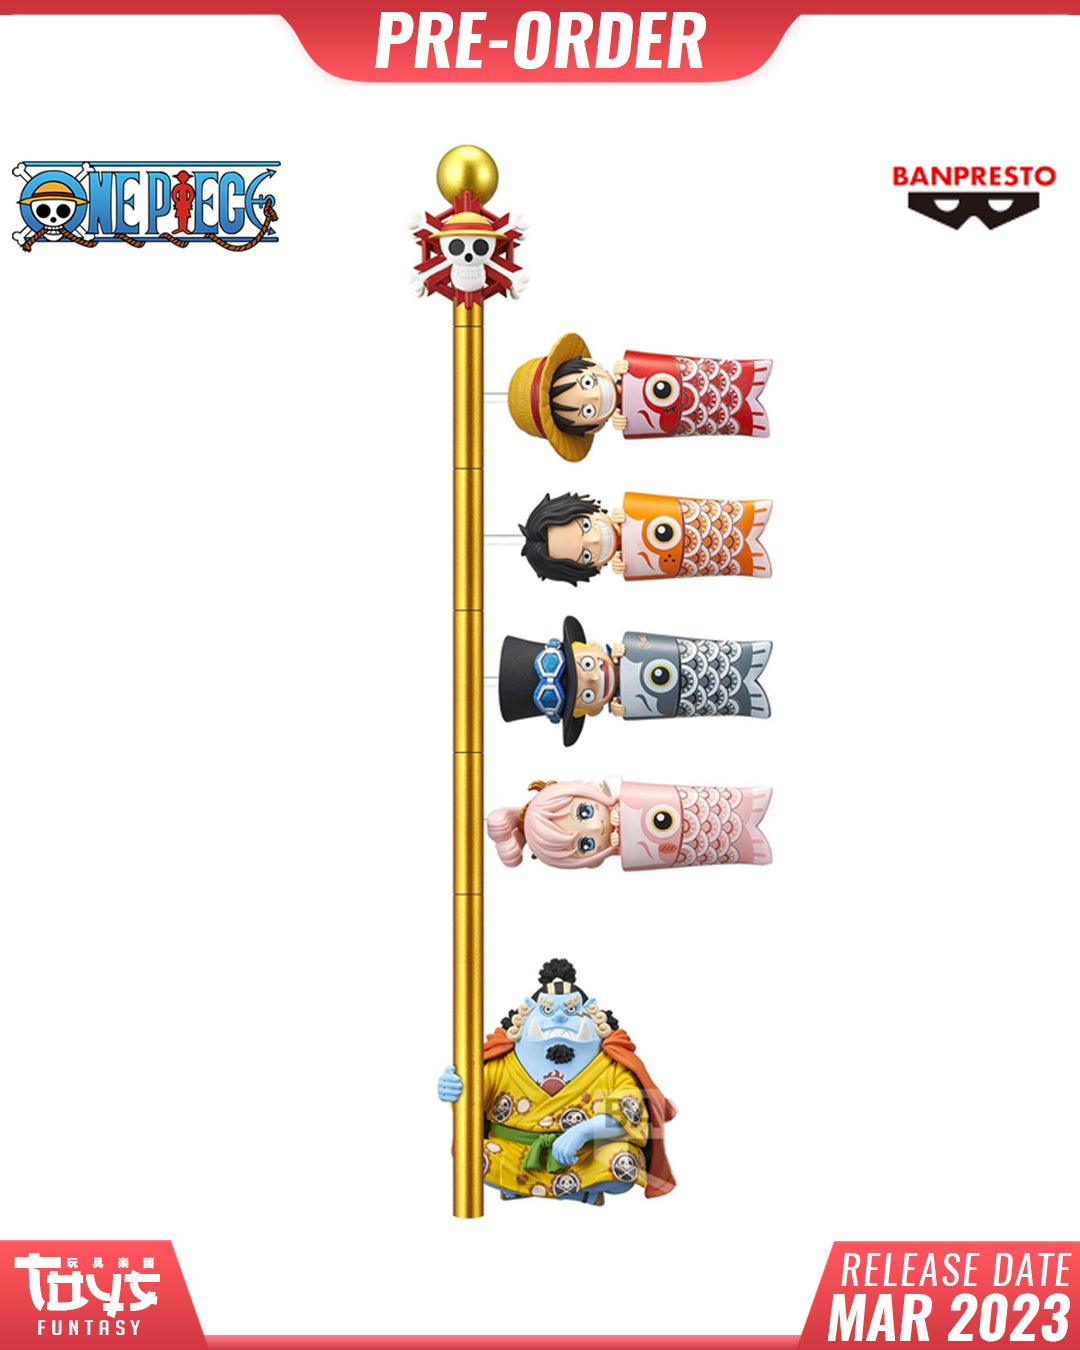 One Piece - WCF World Collectable Figures - Carp Streamer Set of 5 Figures